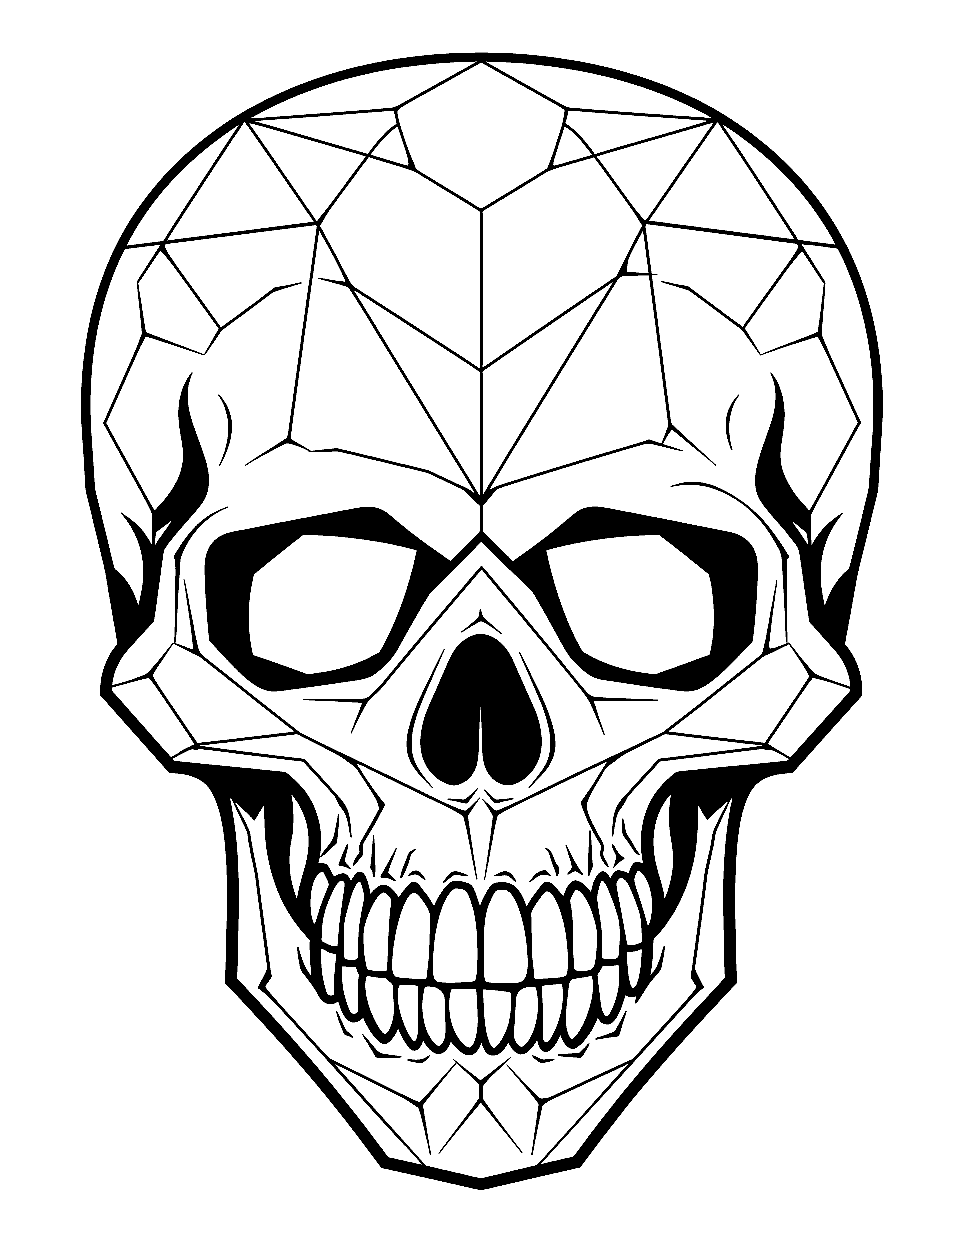 Aesthetic Minimalist Skull Coloring Page - A skull designed with polygonal patterns, embodying a modern aesthetic.